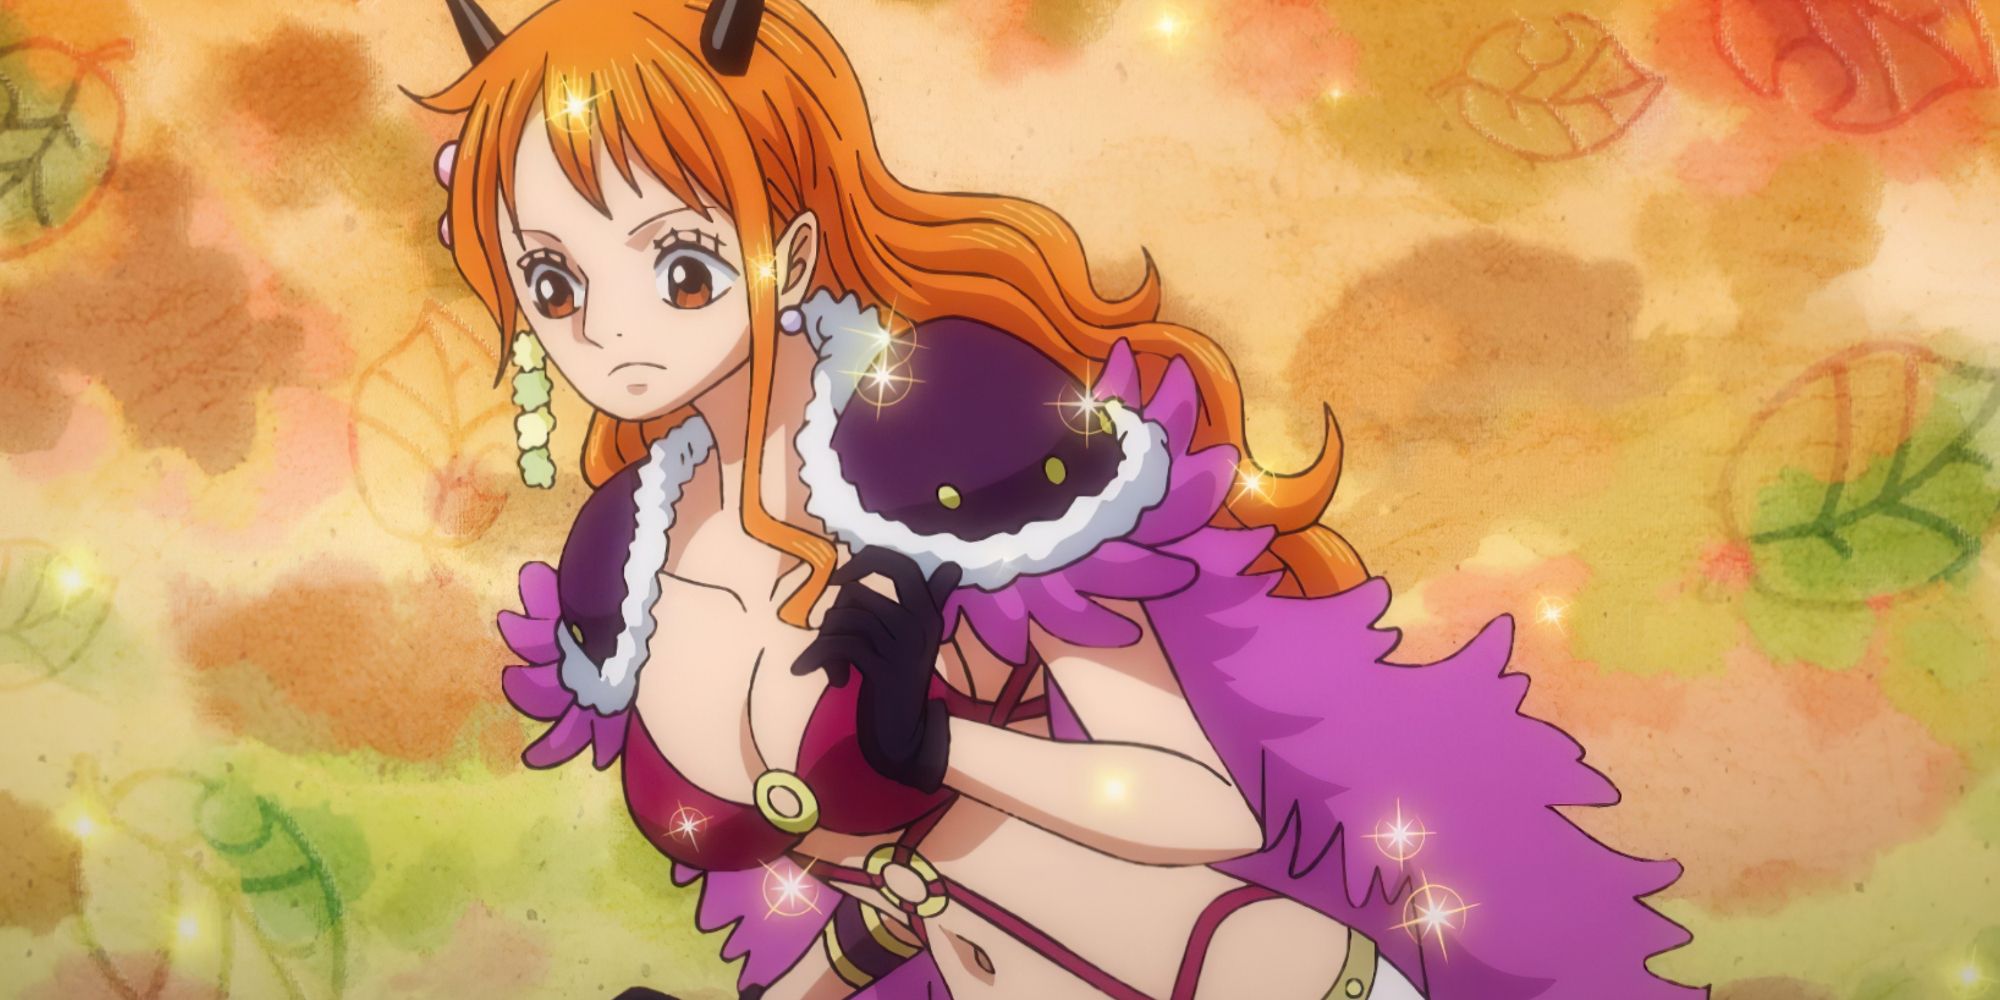 Nami's initial outfit for the Onigashima raid in One Piece.